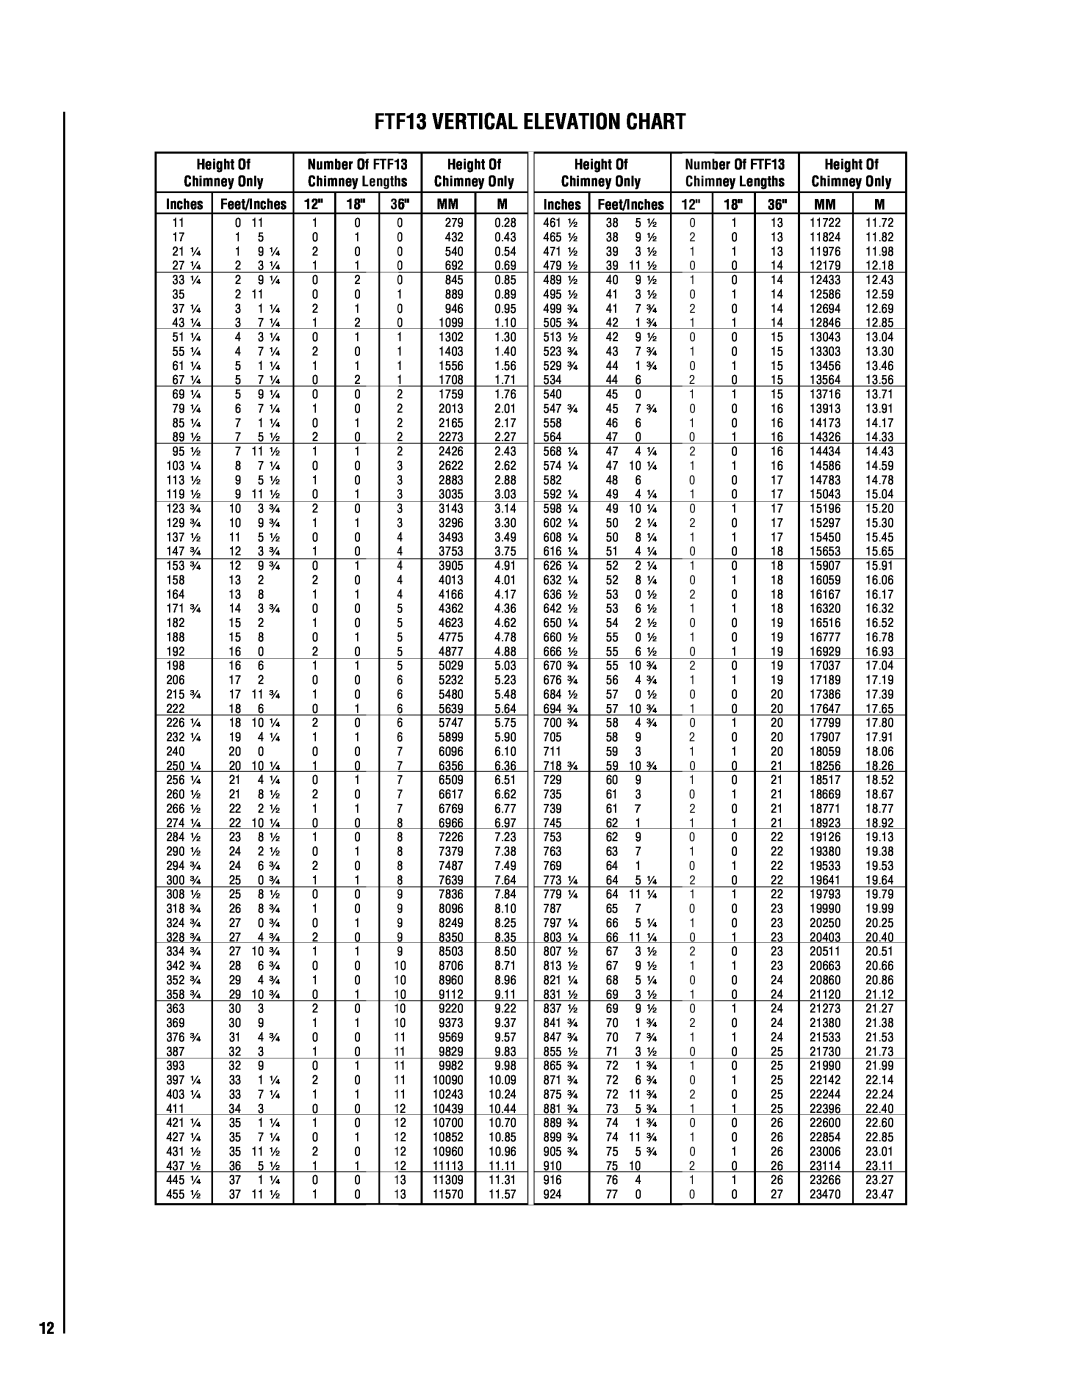 Lucent Technologies EST-48 installation instructions FTF13 VERTICAL ELEVATION CHART, Height Of, Chimney Only 